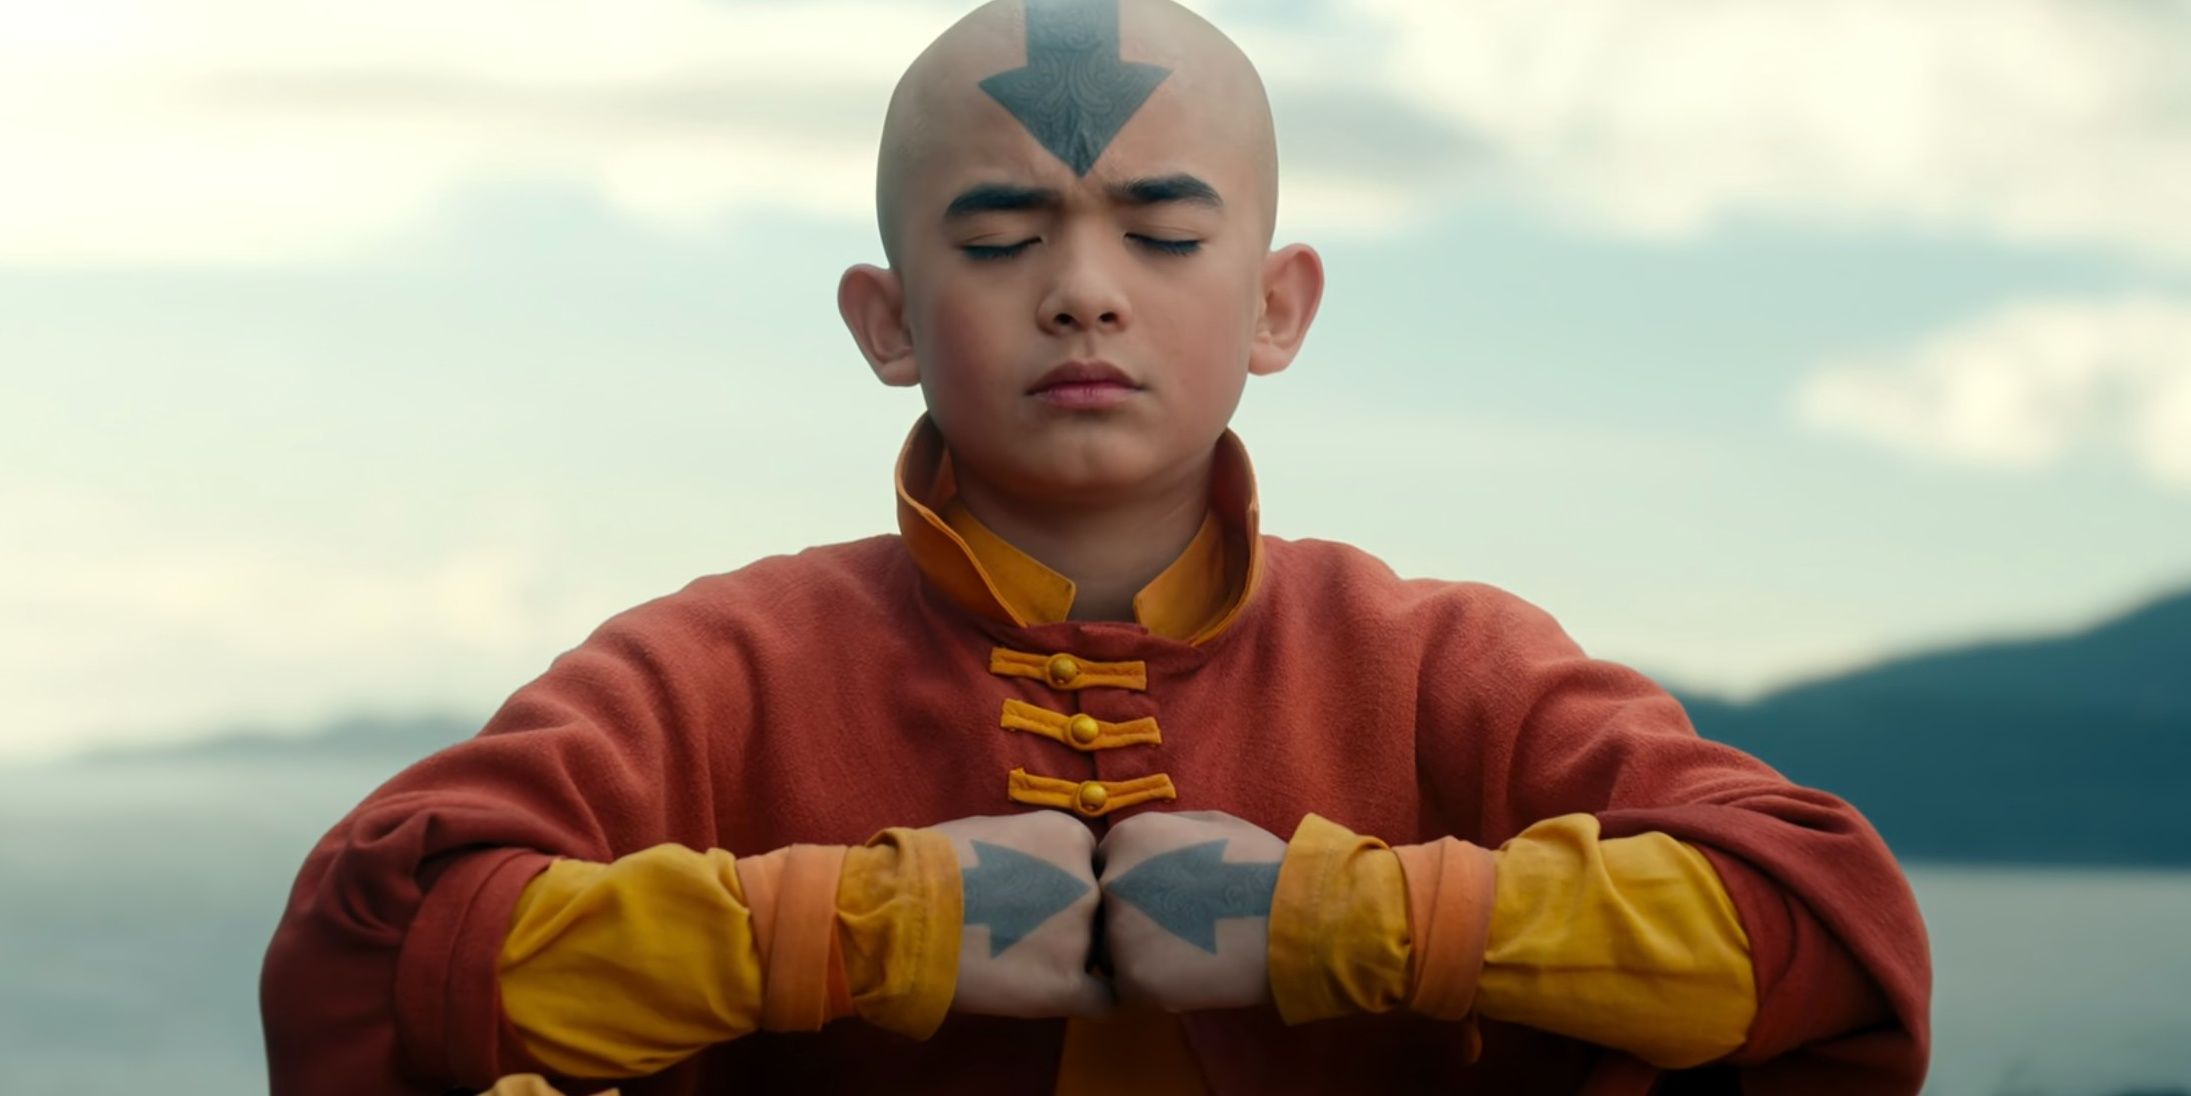 Aang meditating with his fists together